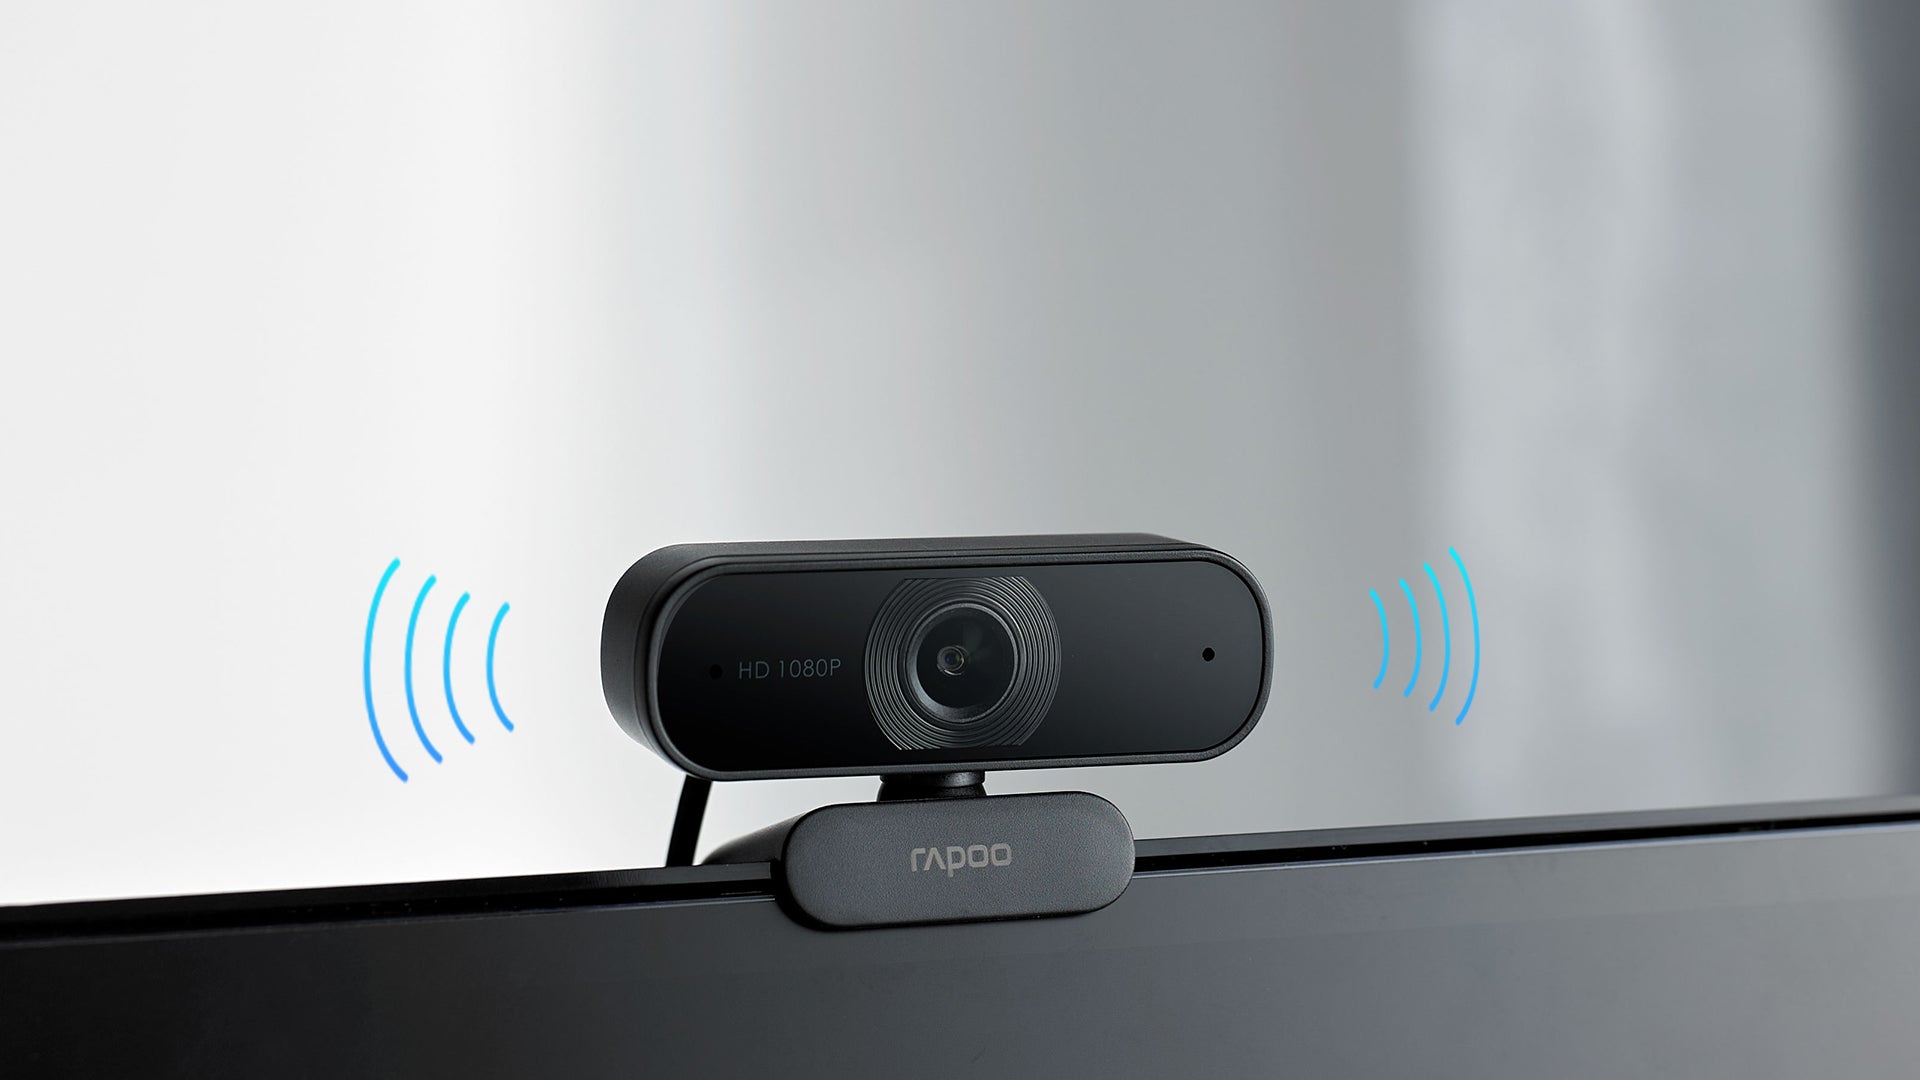 Fhd 1080P Webcam With Usb 2.0 Compatibility (C260)